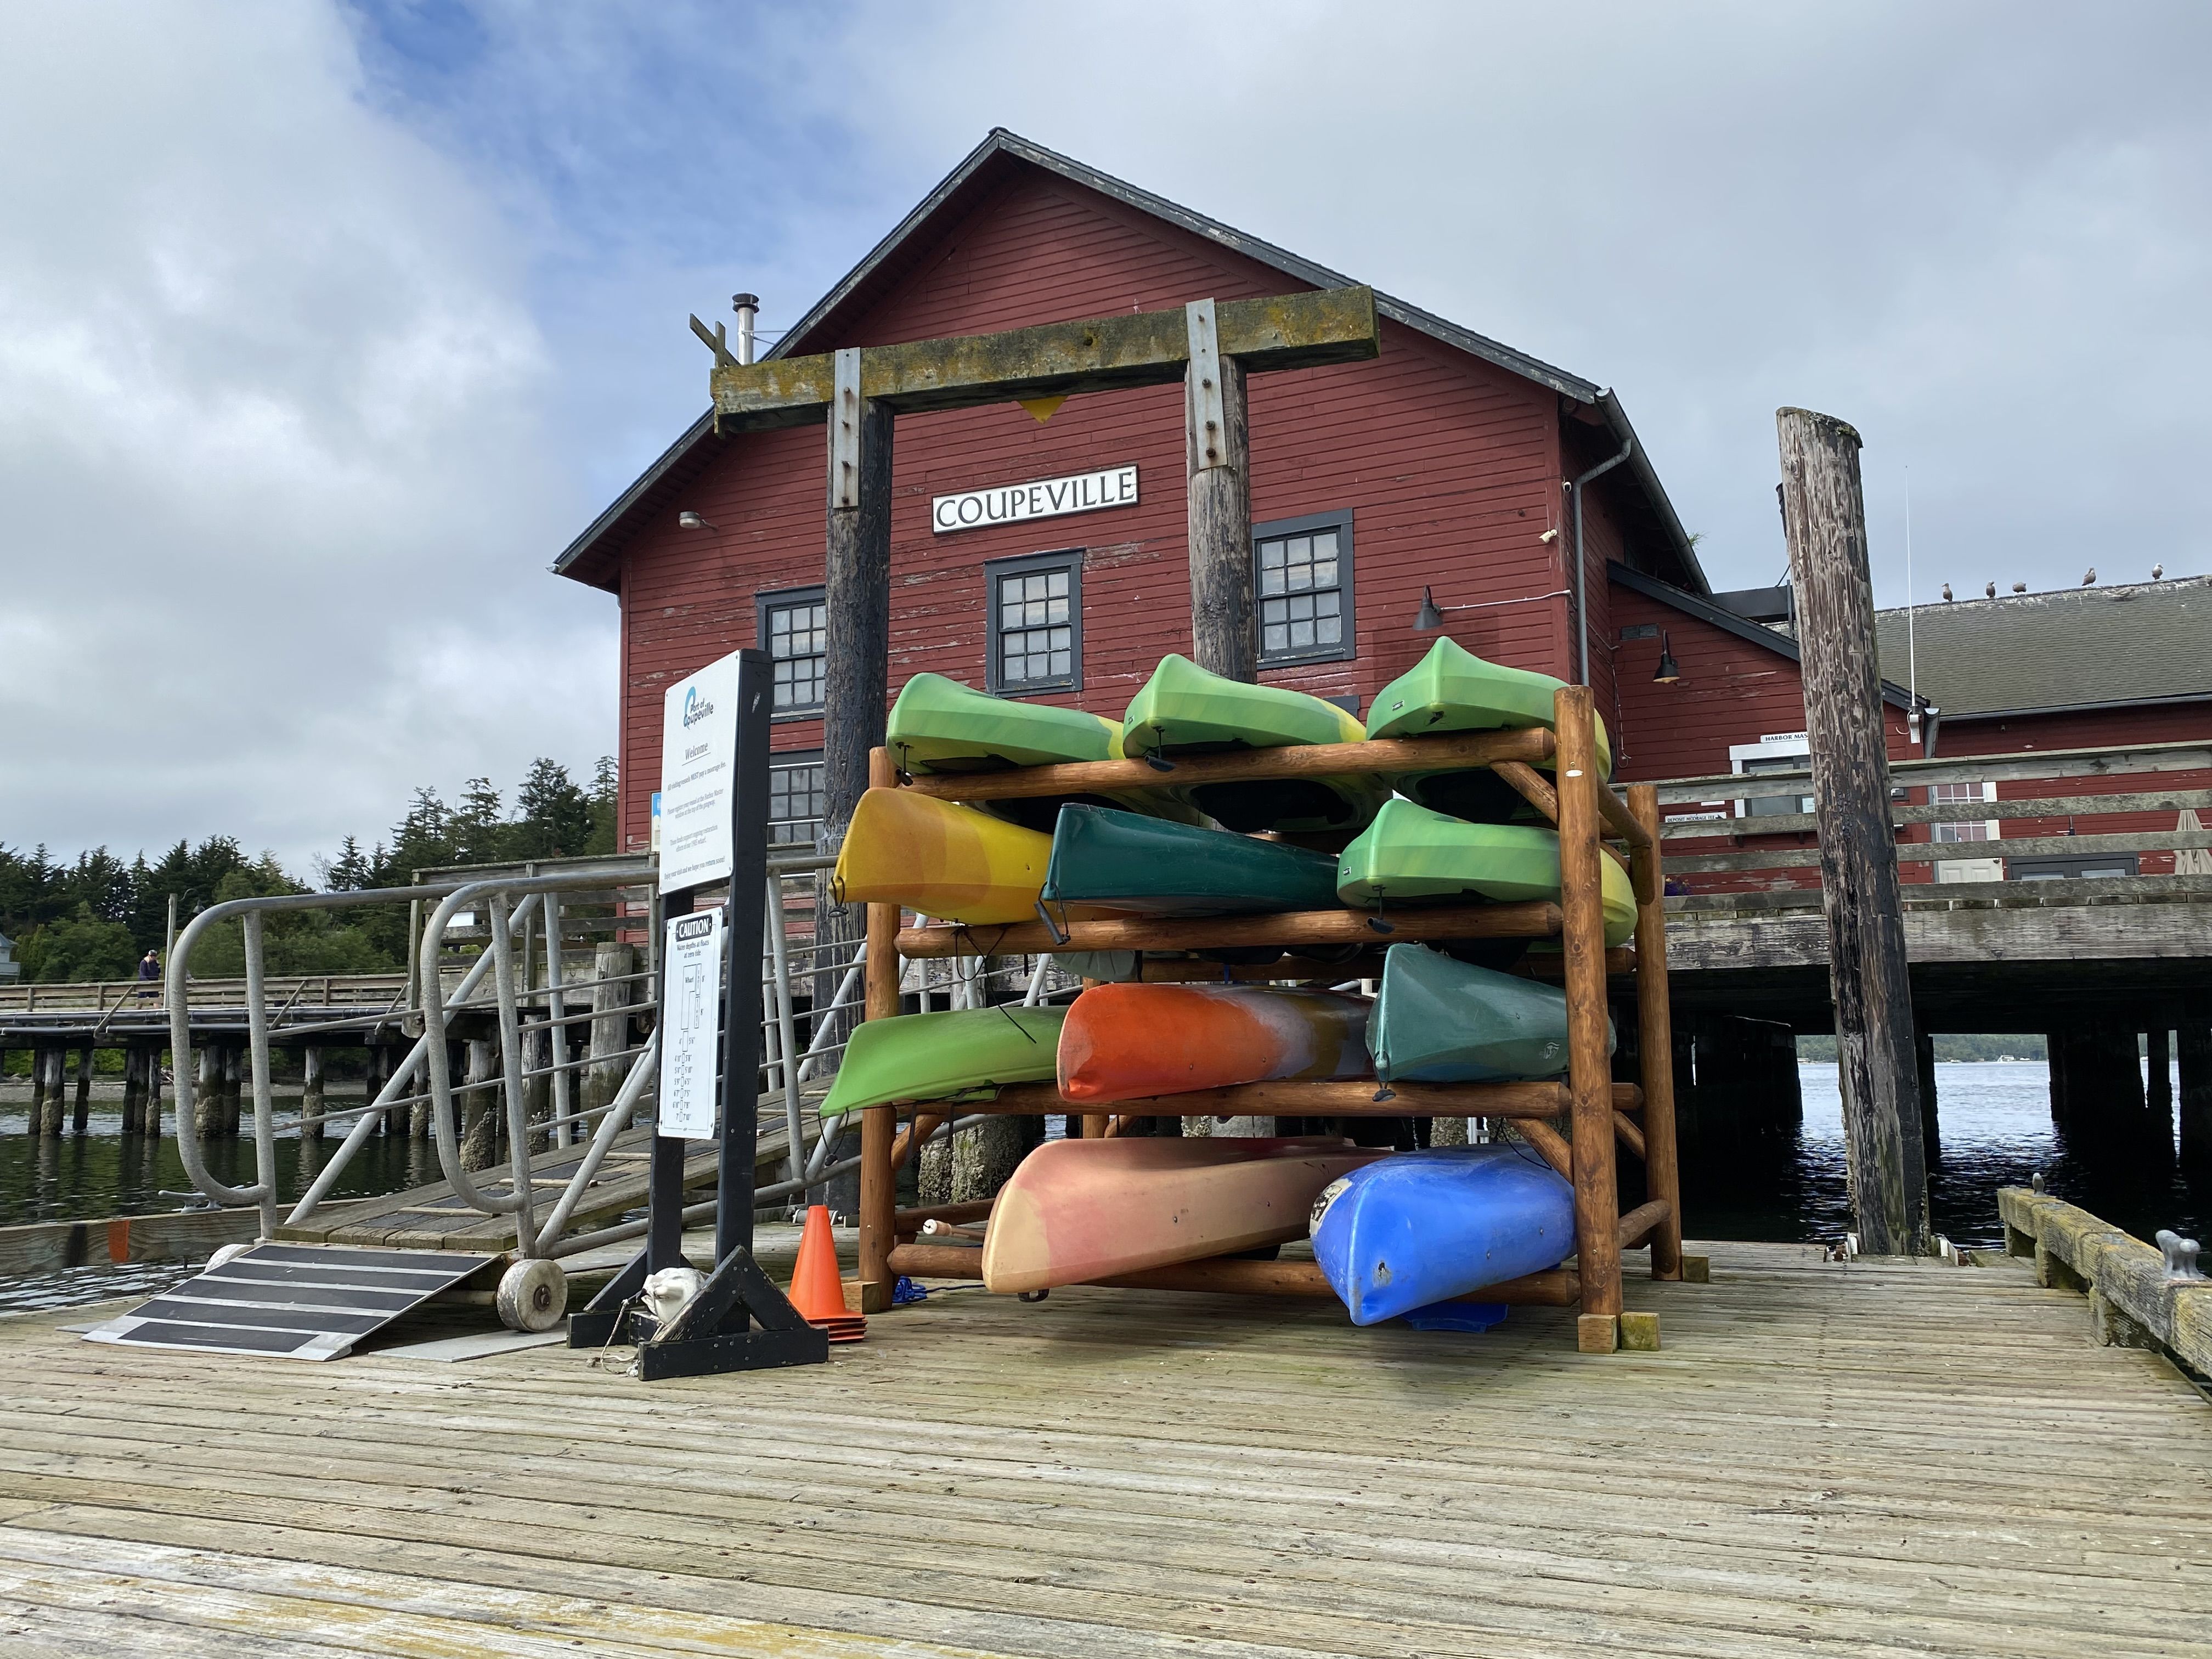 Labeled a red wharf building "Coupeville" with colorful canoes and kayaks on a rack in front. 